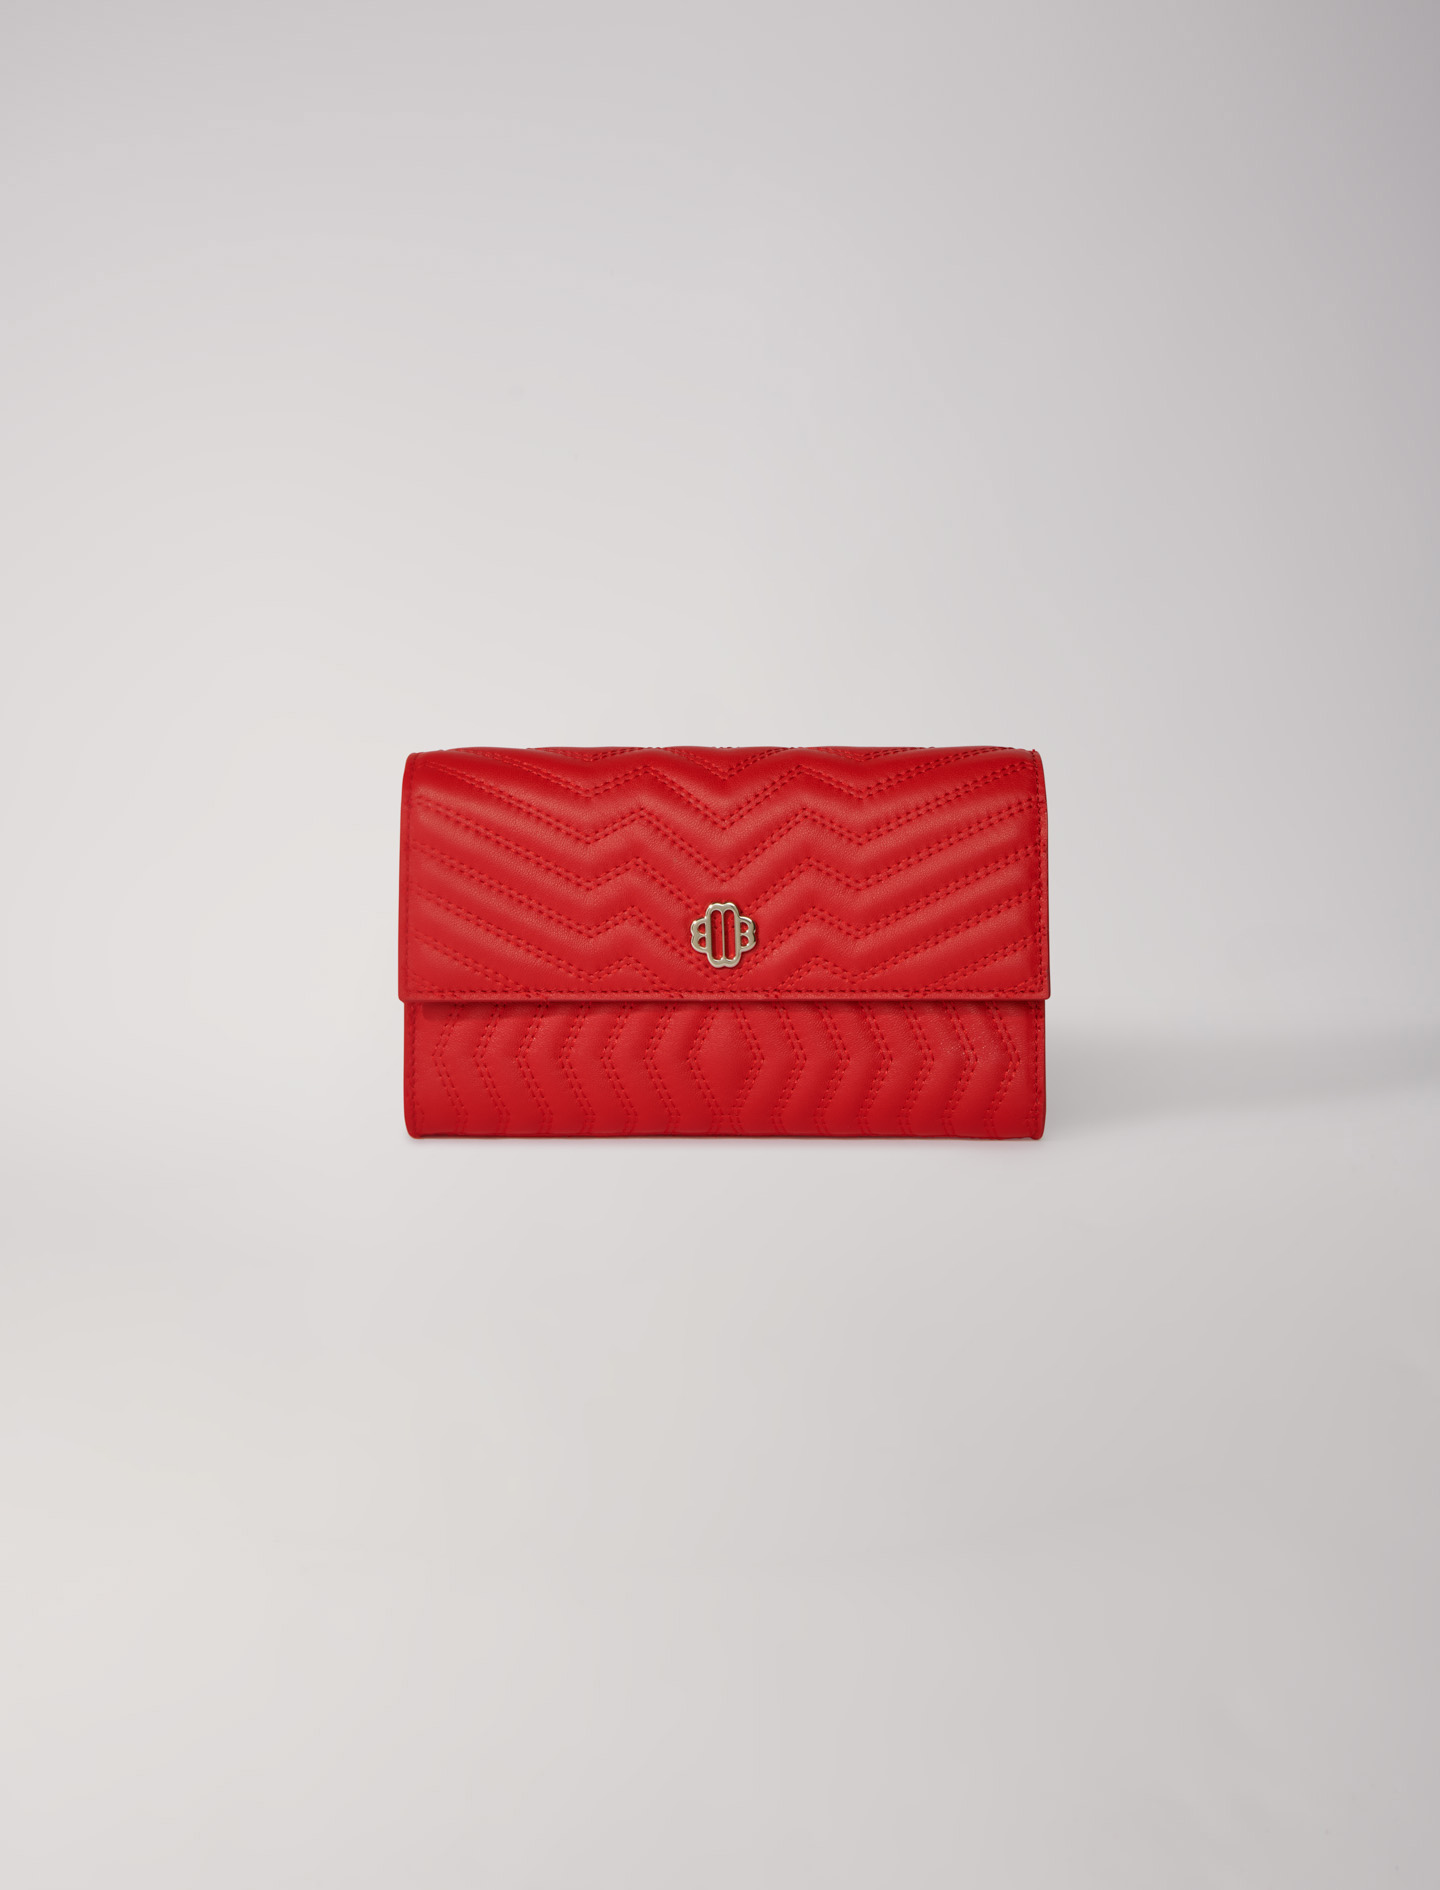 Maje Woman's brass Leather: 223CLOVERWALKPAD for Fall/Winter, in color Red / Red